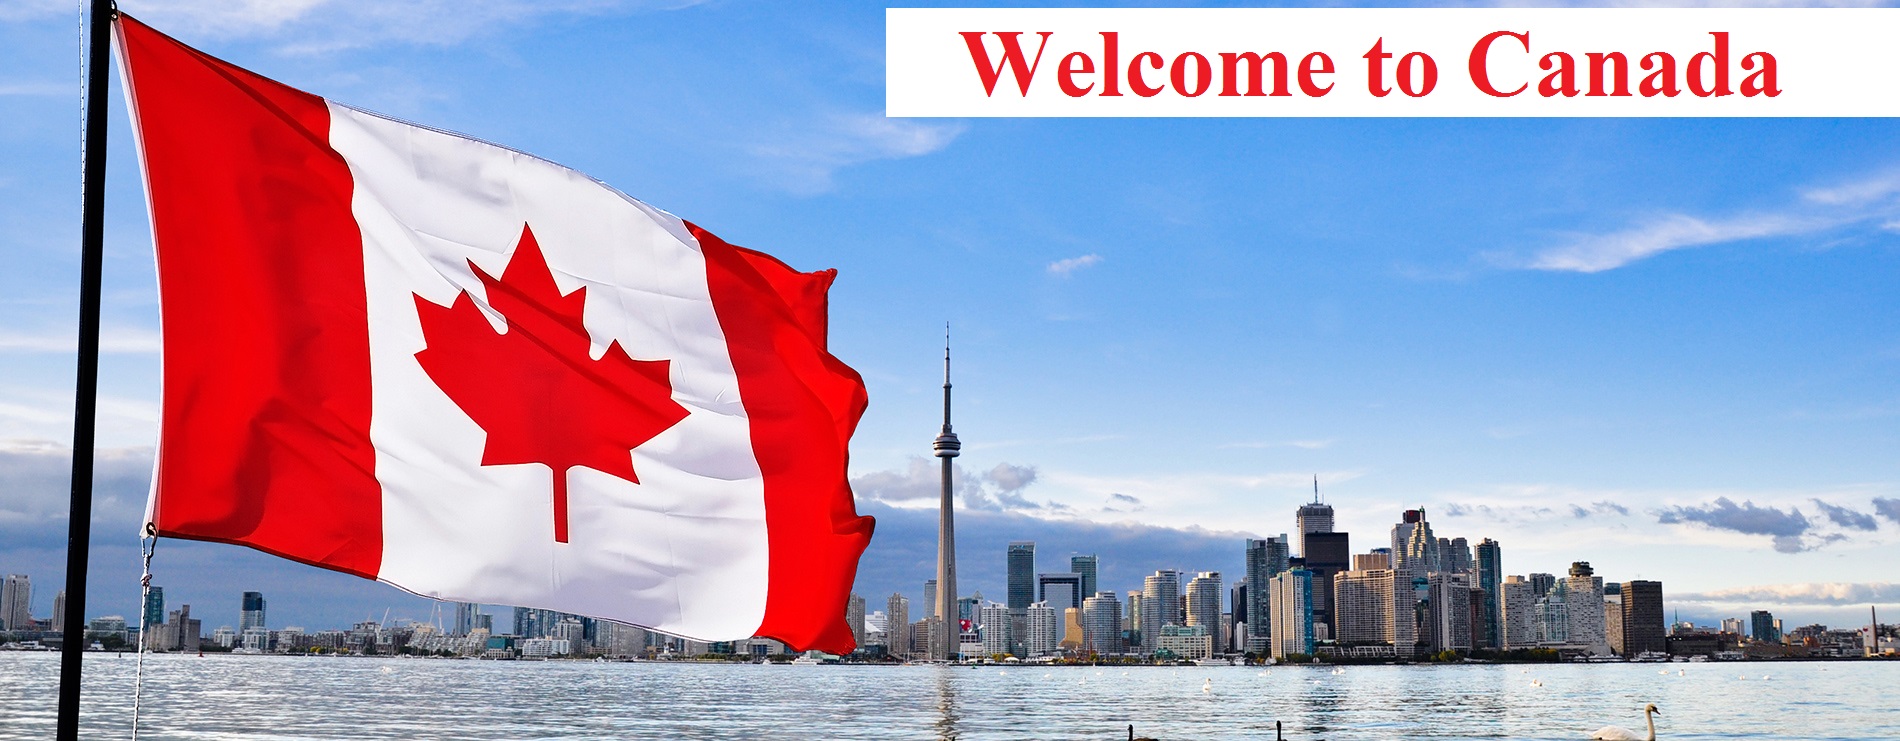 These Professions are always in higher demand in Canada and ease migration process.